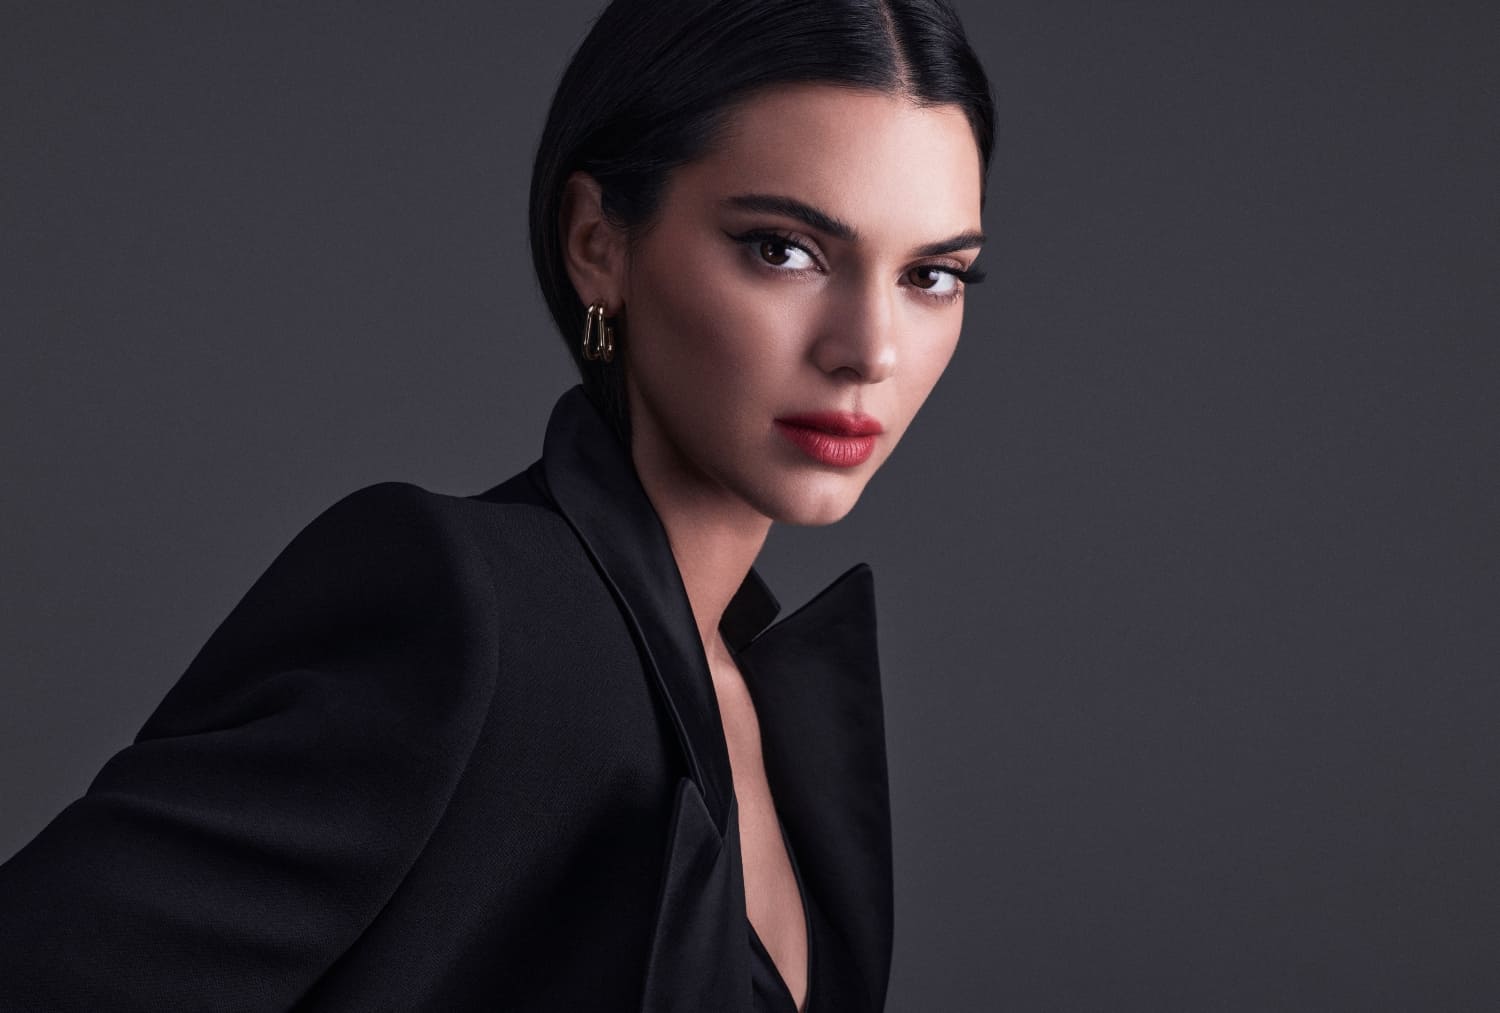 Kendall Jenner’s Latest Project? A Sweet New Erewhon Collaboration!